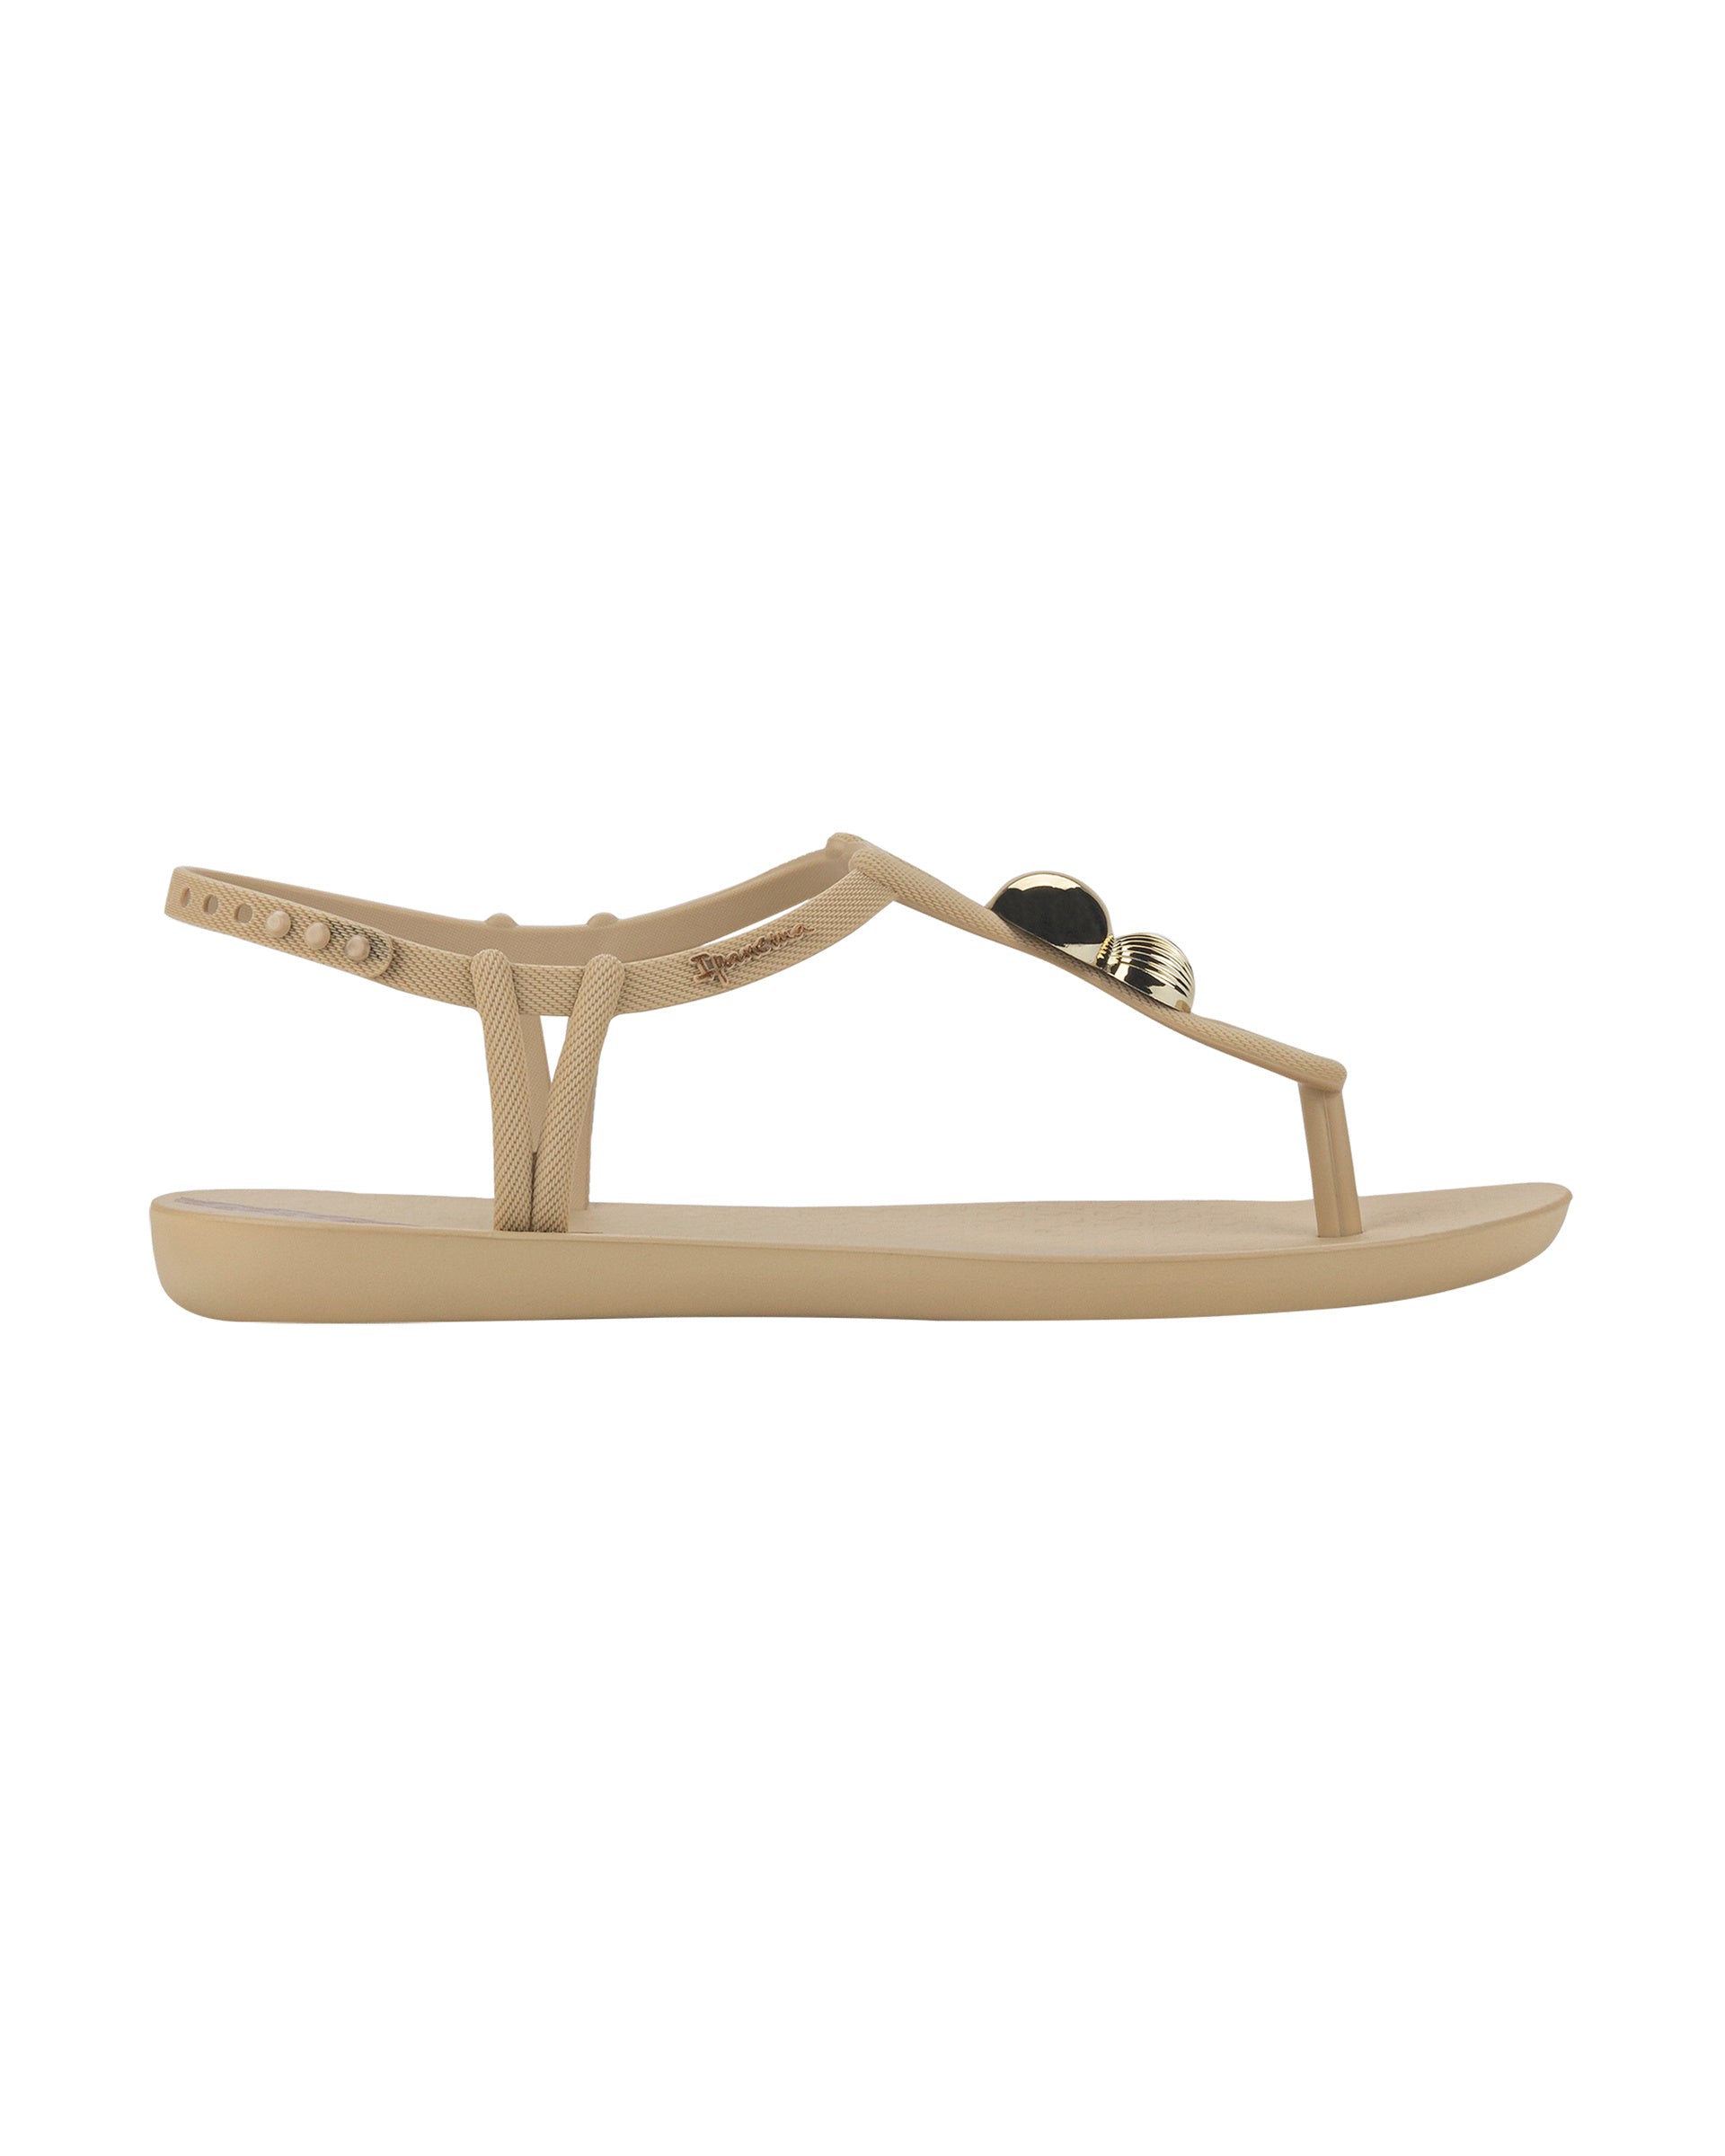 Outer side view of a beige Ipanema Class Spheres women's t-strap sandal with metallic bauble.